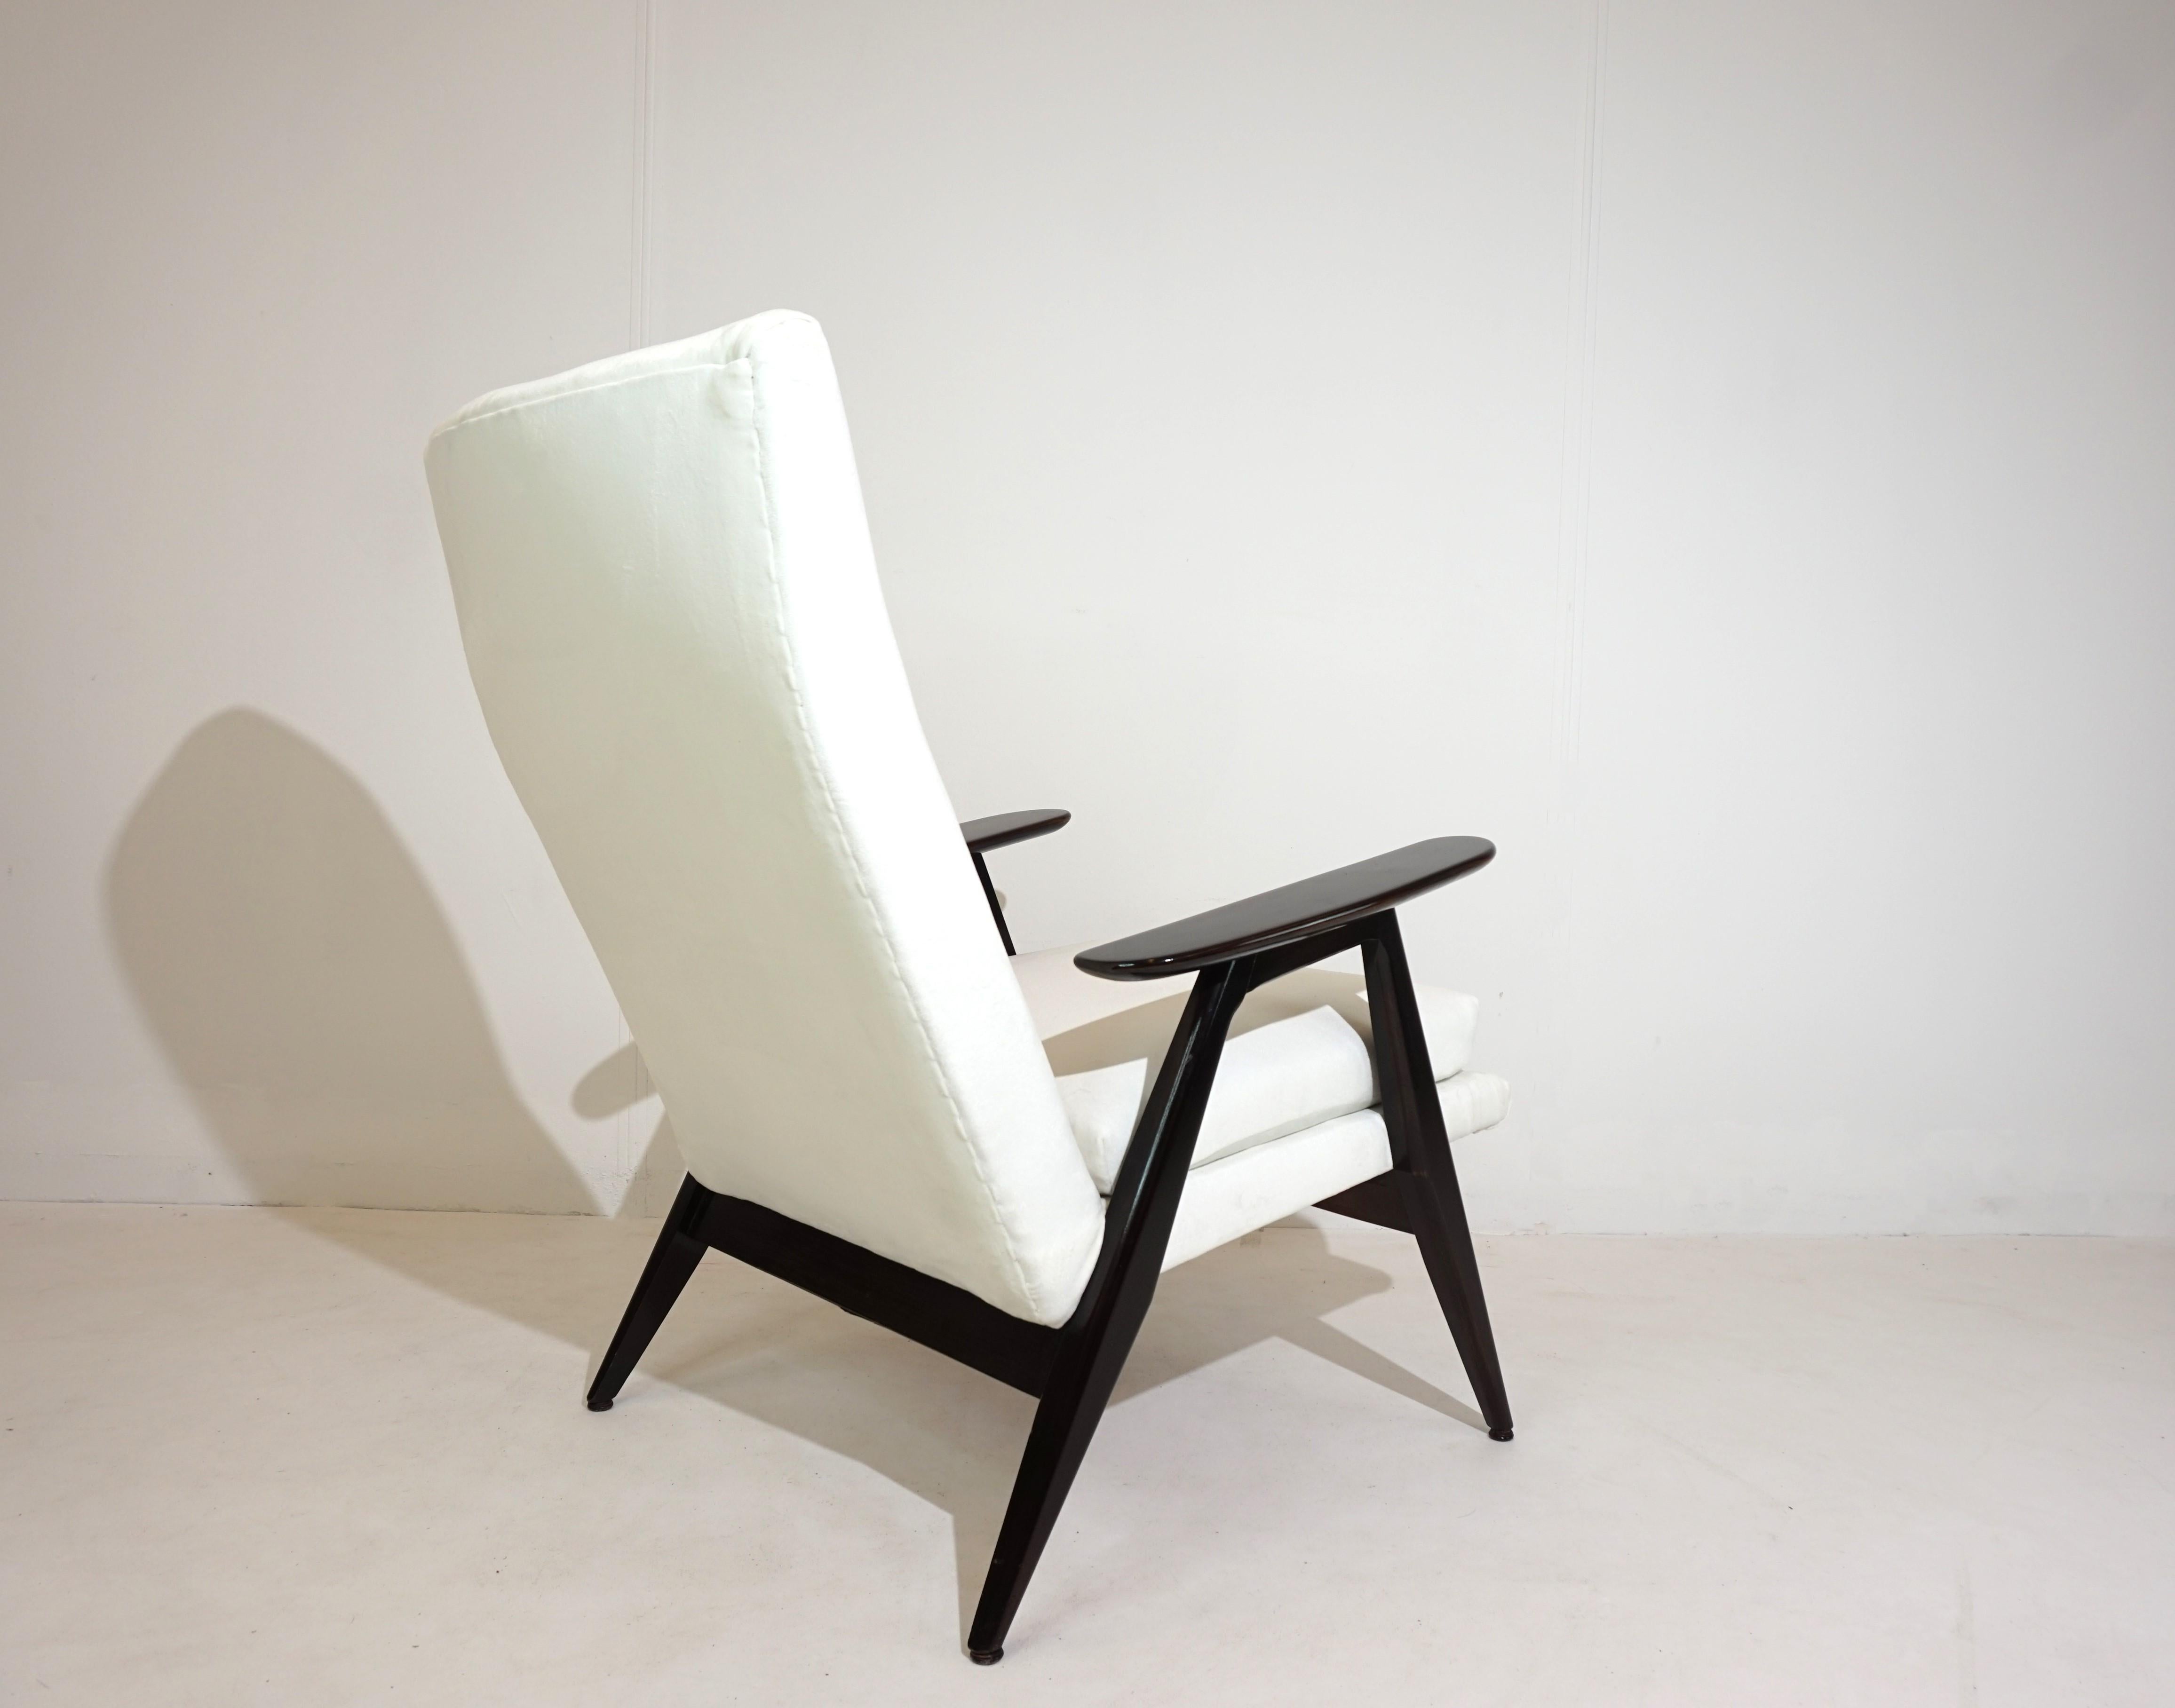 Steiner SK640 lounge chair by Pierre Guariche In Good Condition For Sale In Ludwigslust, DE